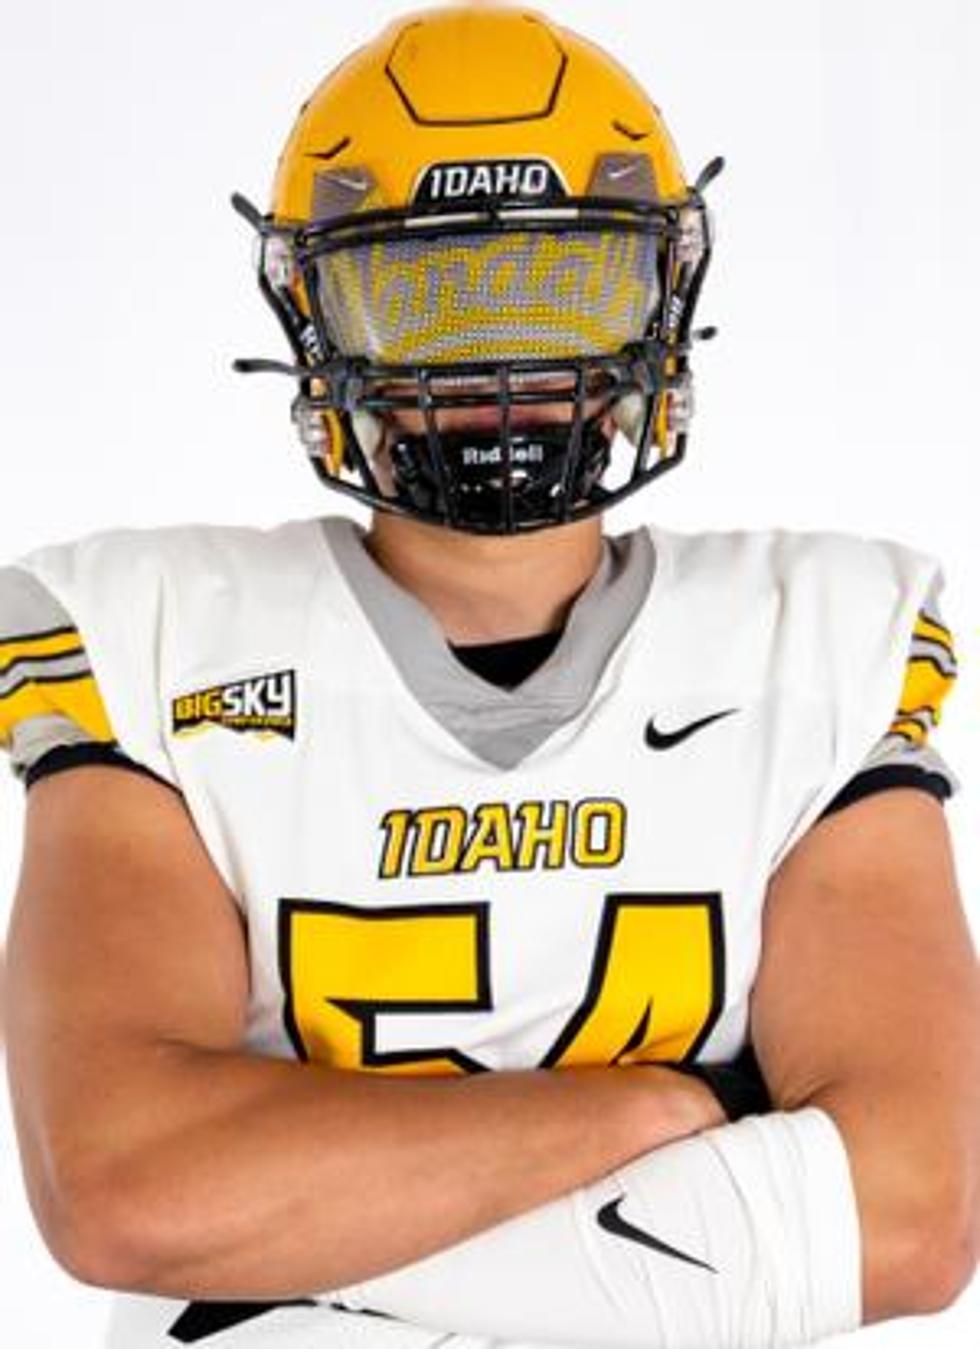 Local High School Football Player to Play for the University of Idaho